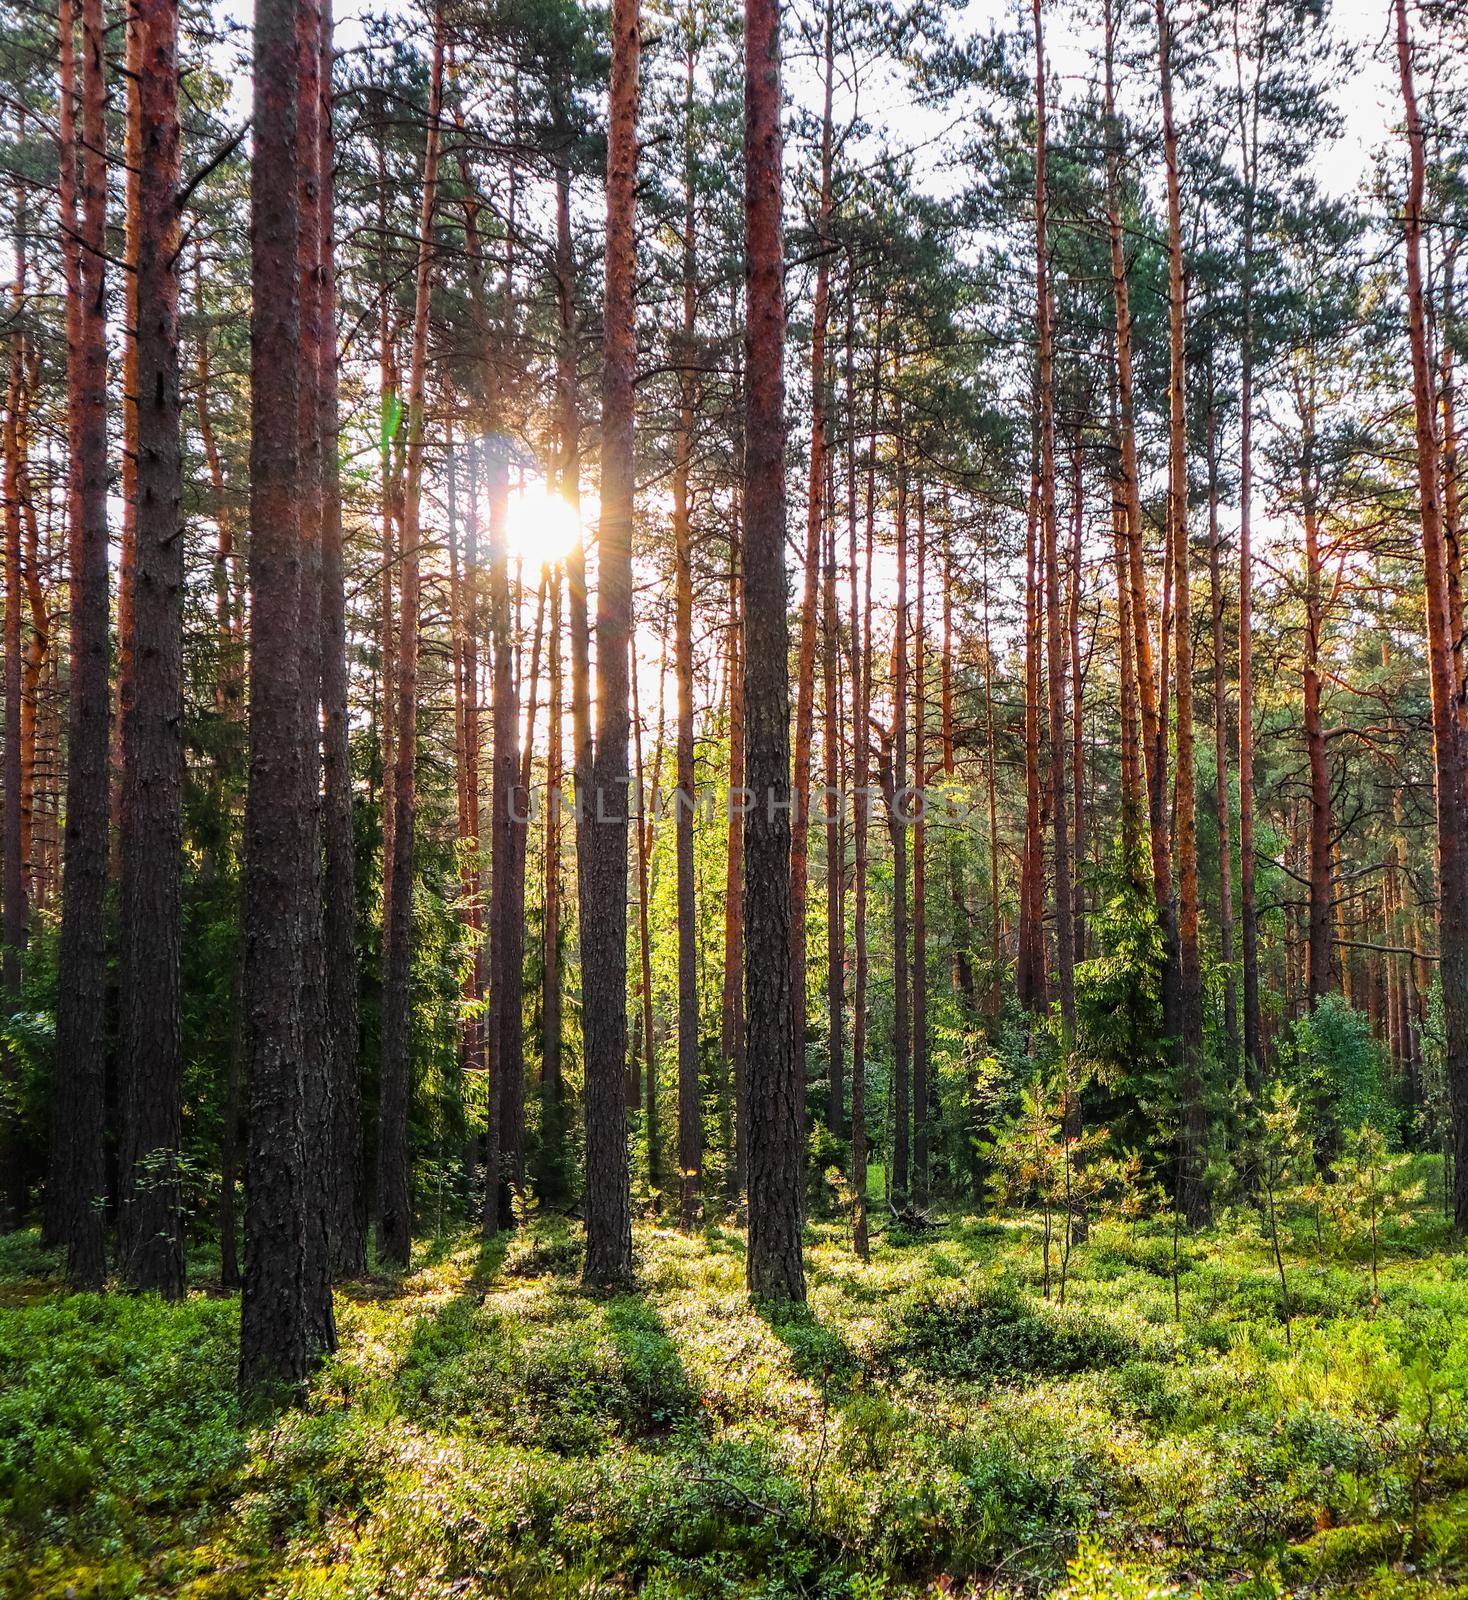 Sunlight on trees in a pine forest at sunset. Summer nature landscape.